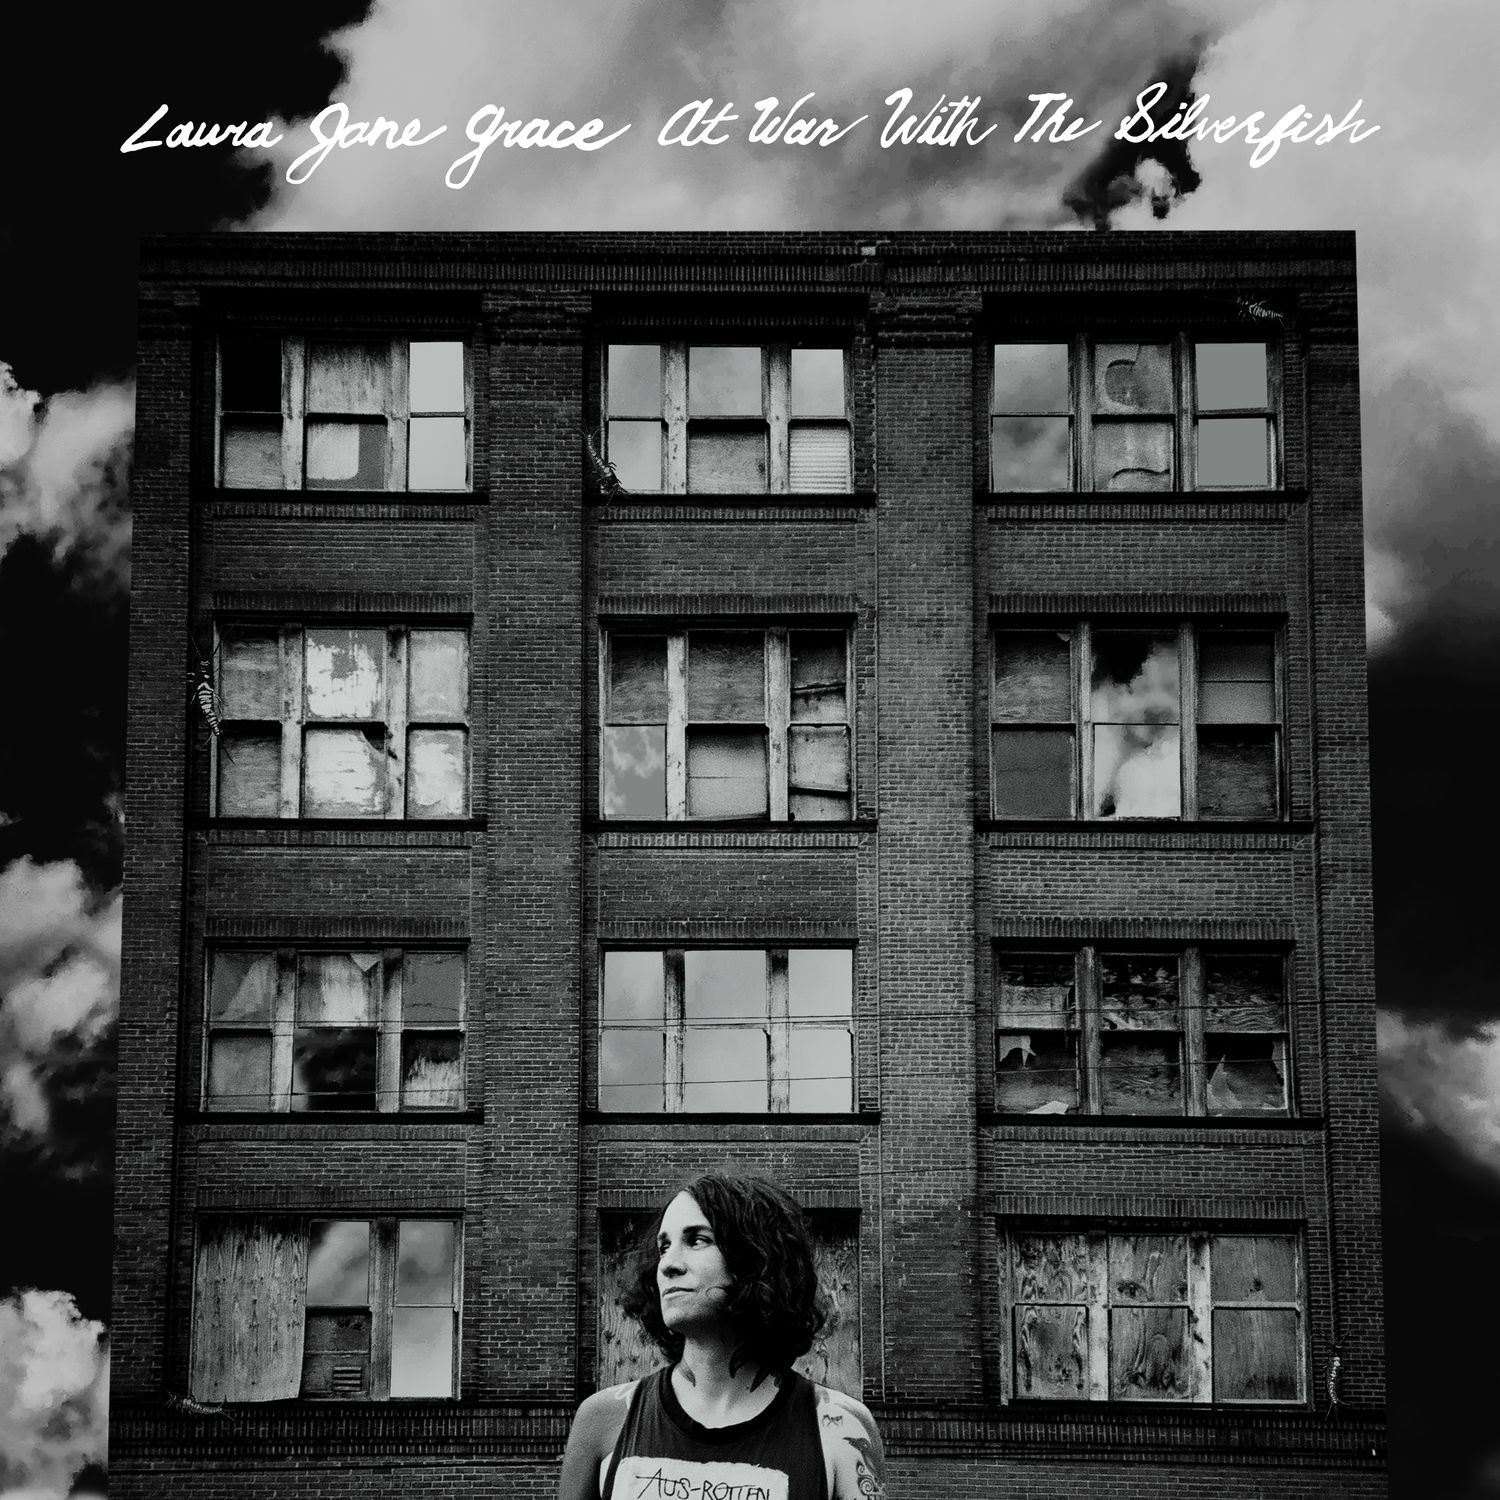 Laura Jane Grace – At War with the Silverfish (EP) (2021) [FLAC 24bit/44,1kHz]